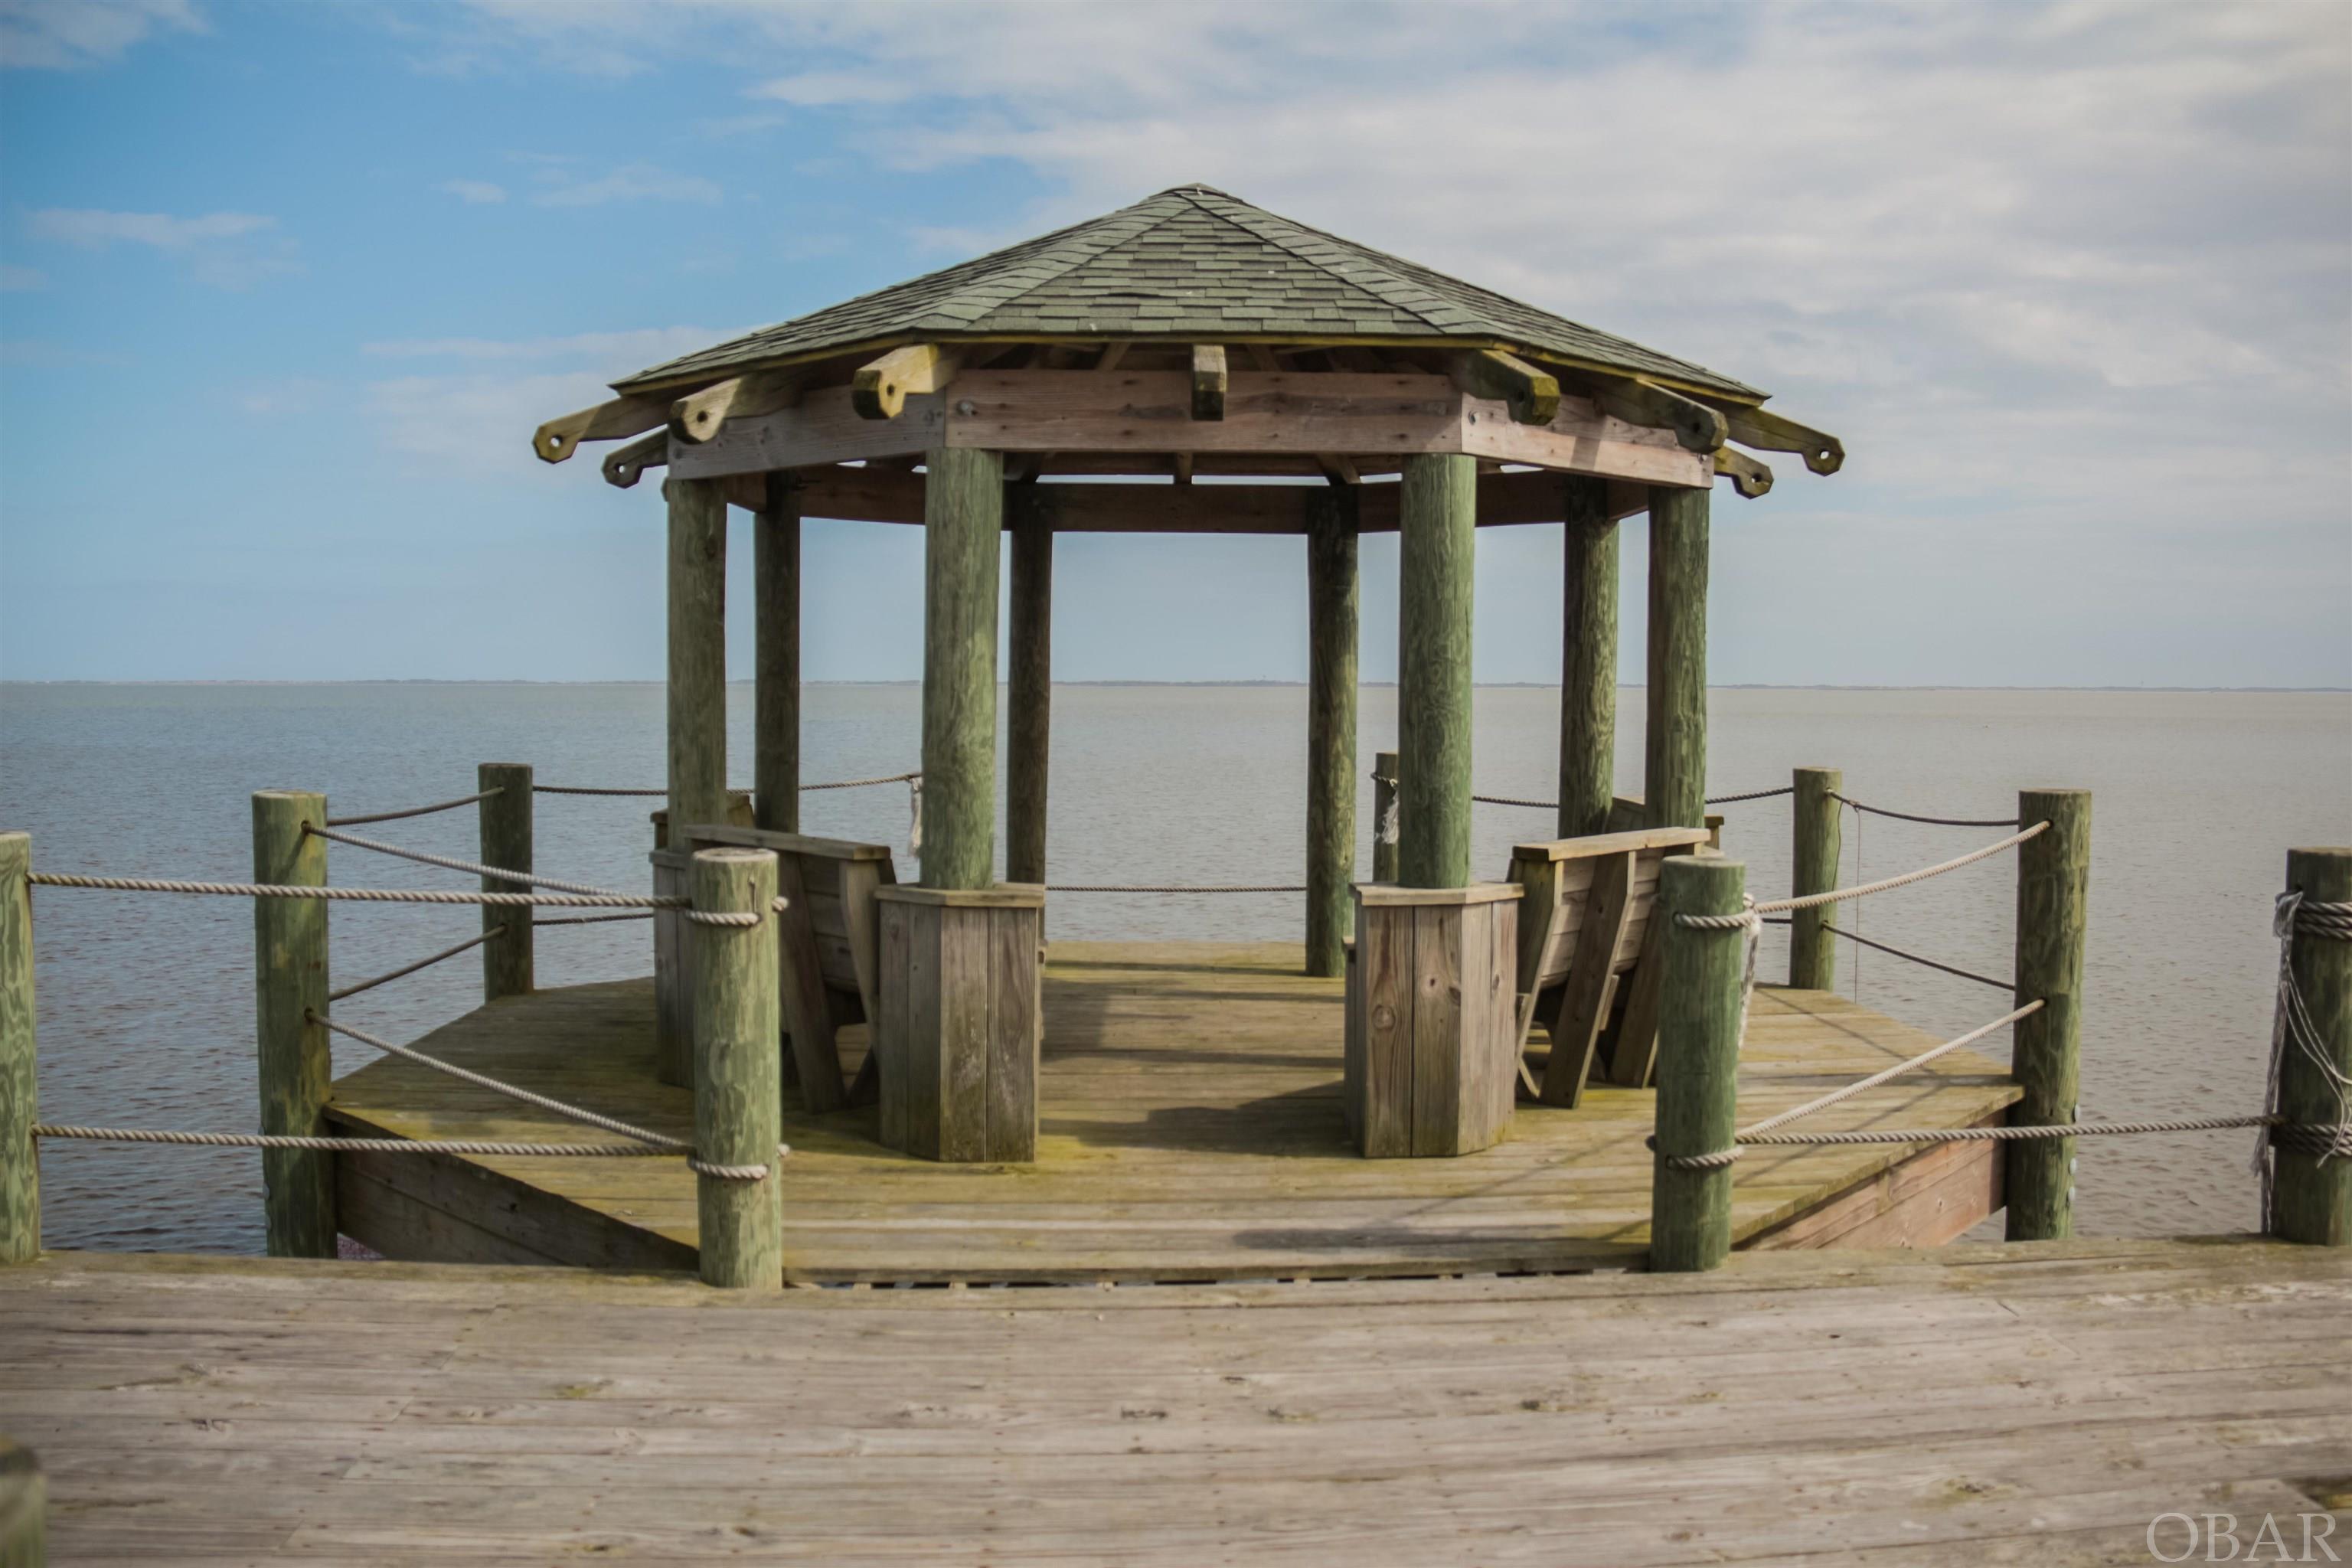 This is the gazebo at the end of the pier